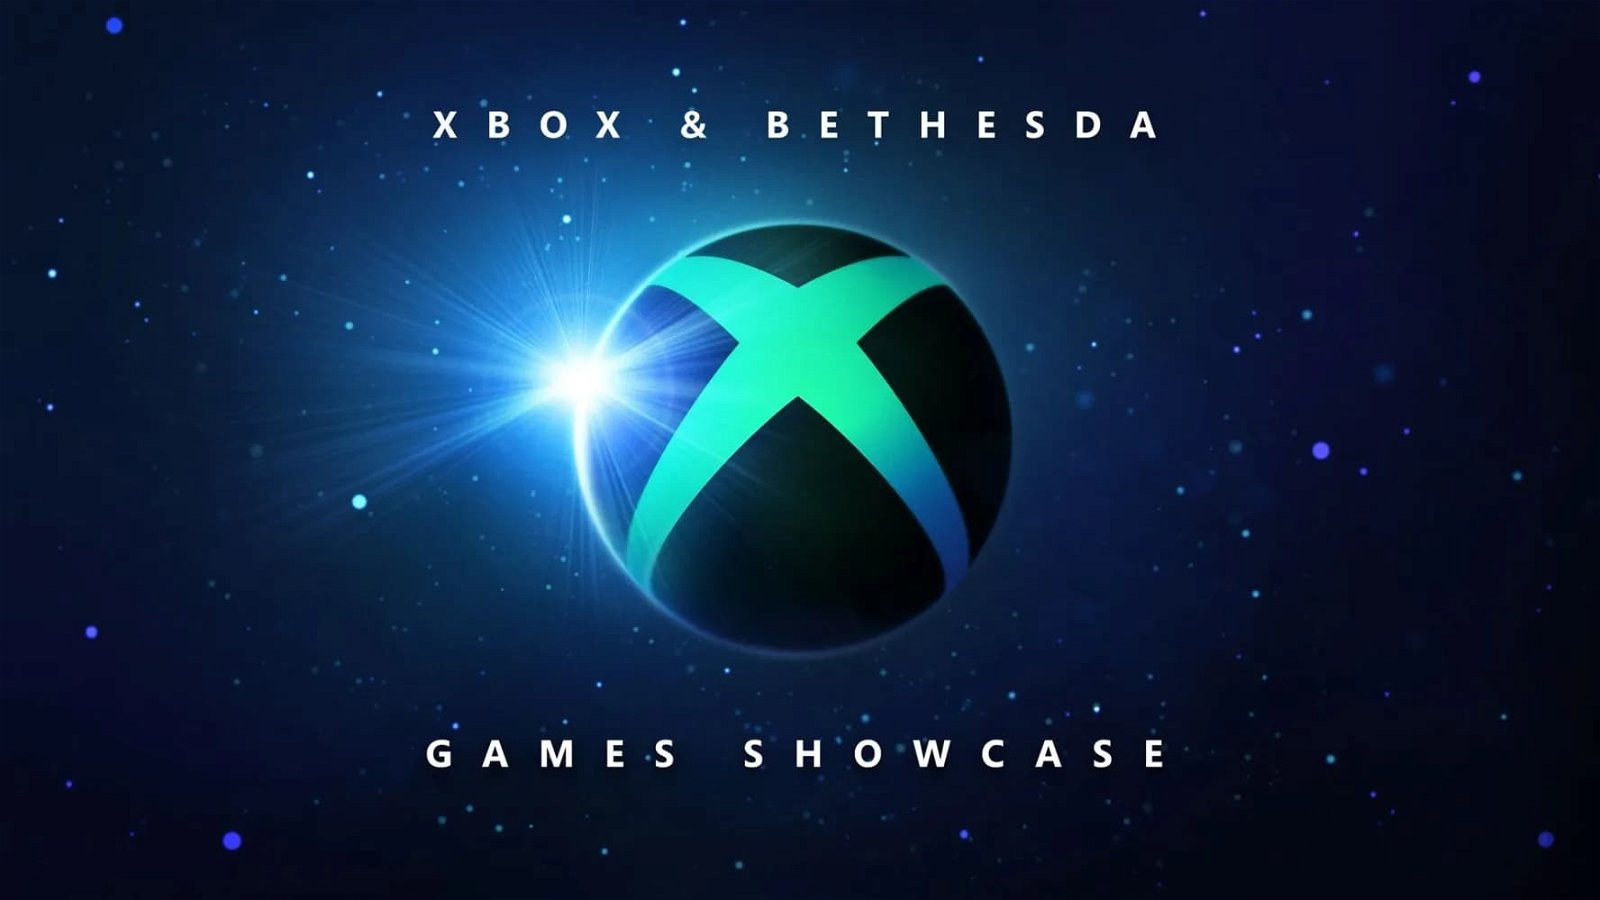 The Xbox and Bethesda event would have two major absences, according to the latest information